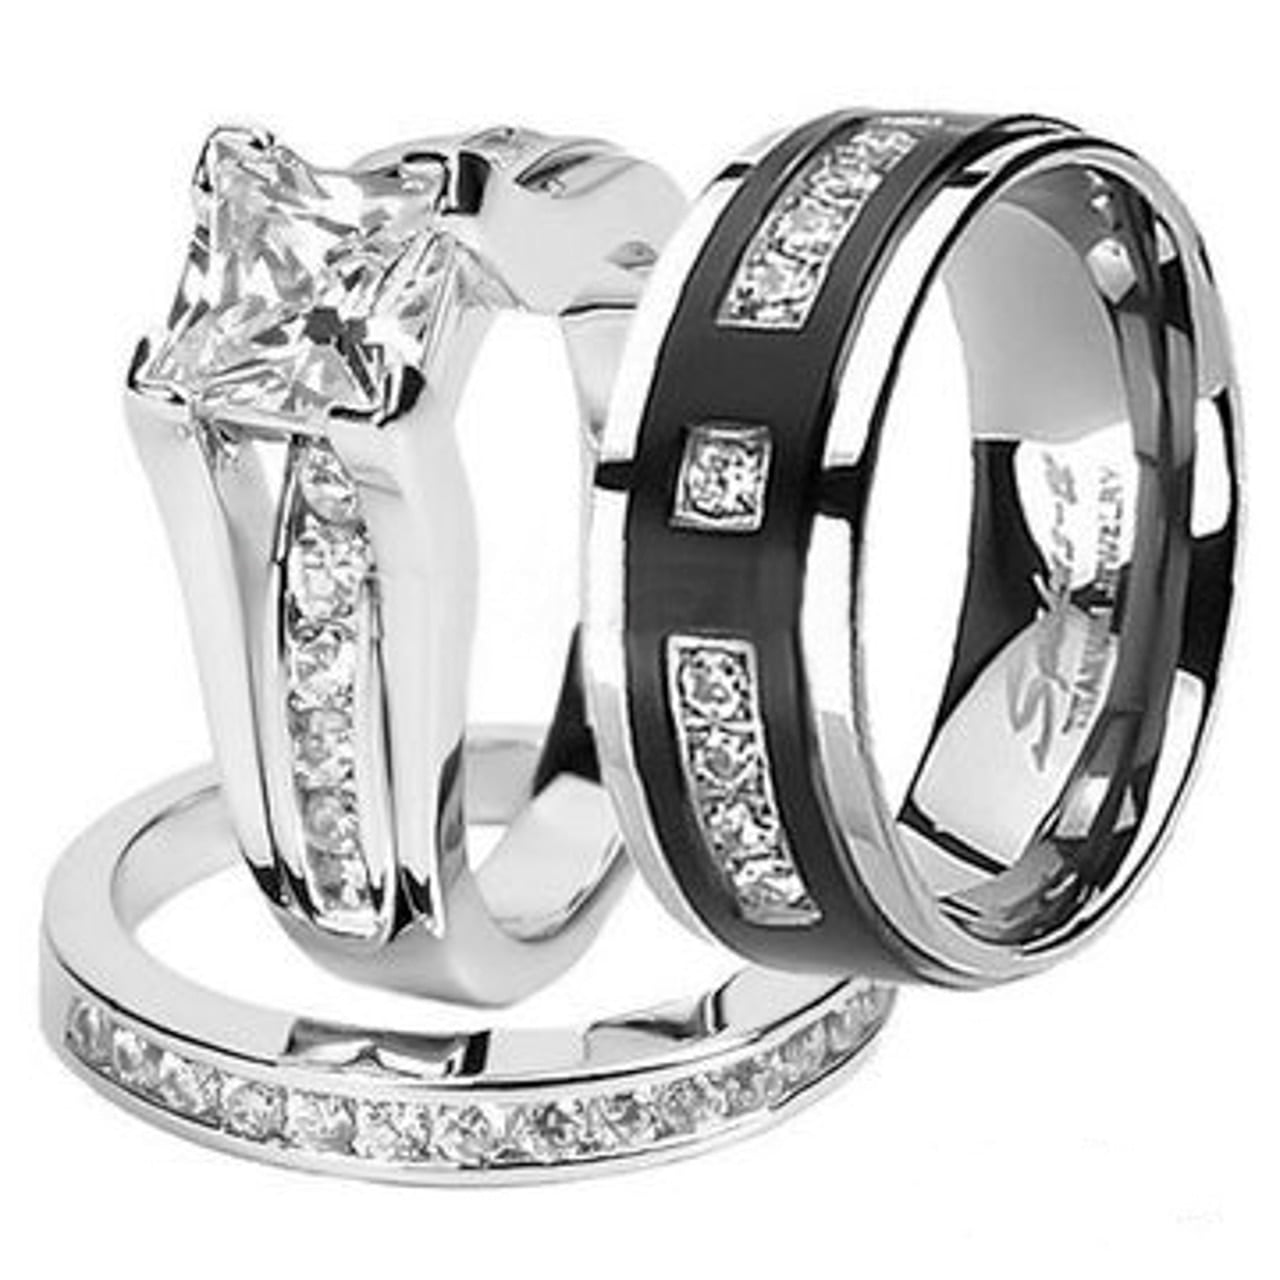 Engagement Ring Stainless Steel Mens Simulated Diamond Womens Wedding Band Set 